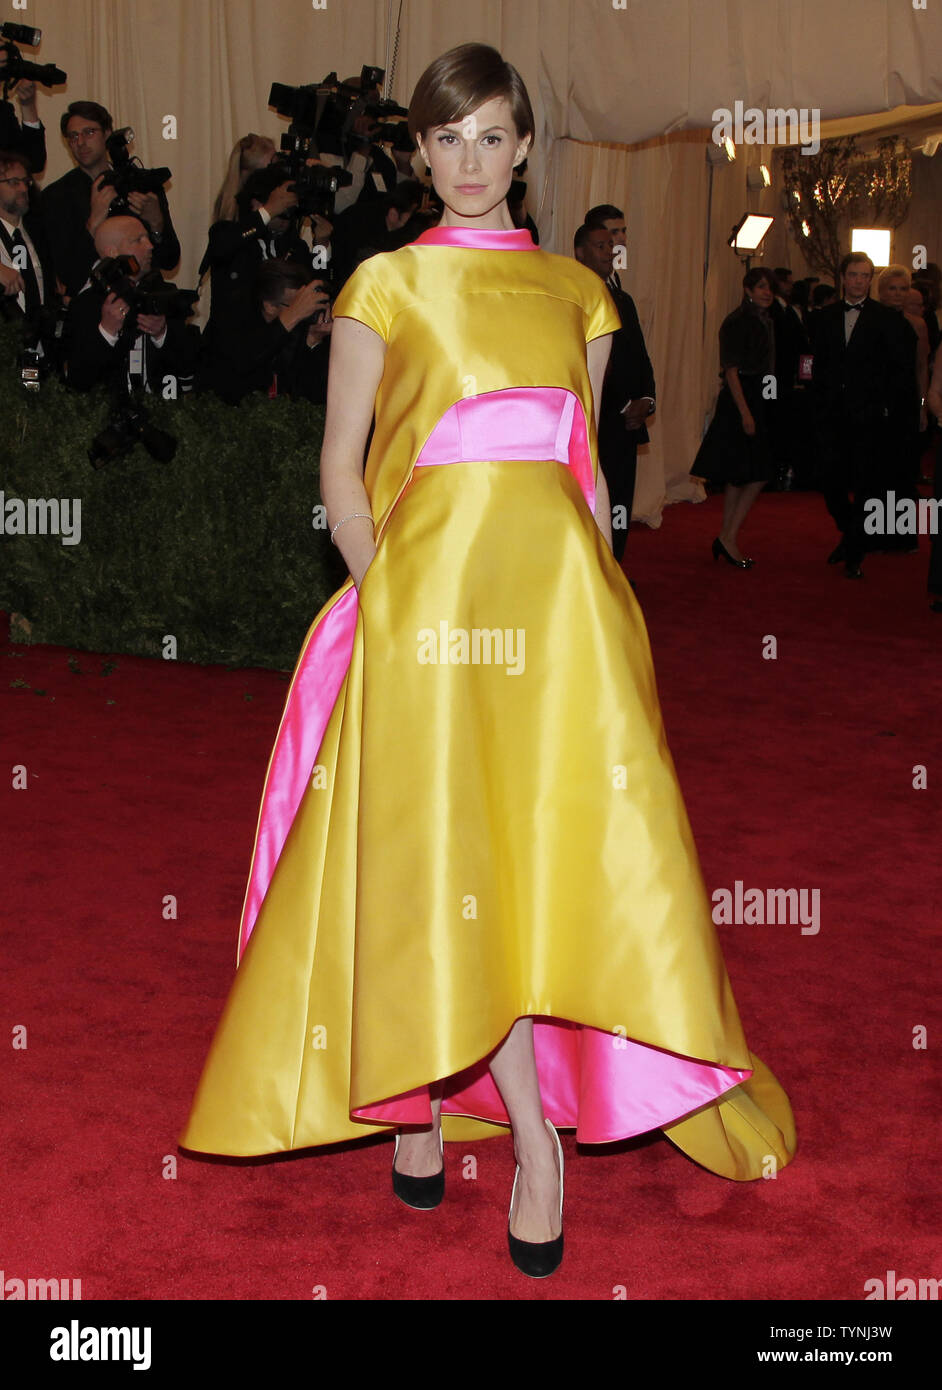 Elettra Rossellini Wiedemann arrives on the red carpet at the Costume Institute Benefit for the 'PUNK: Chaos to Couture' exhibition at the Metropolitan Museum of Art in New York City on May 6, 2013.    UPI/John Angelillo Stock Photo